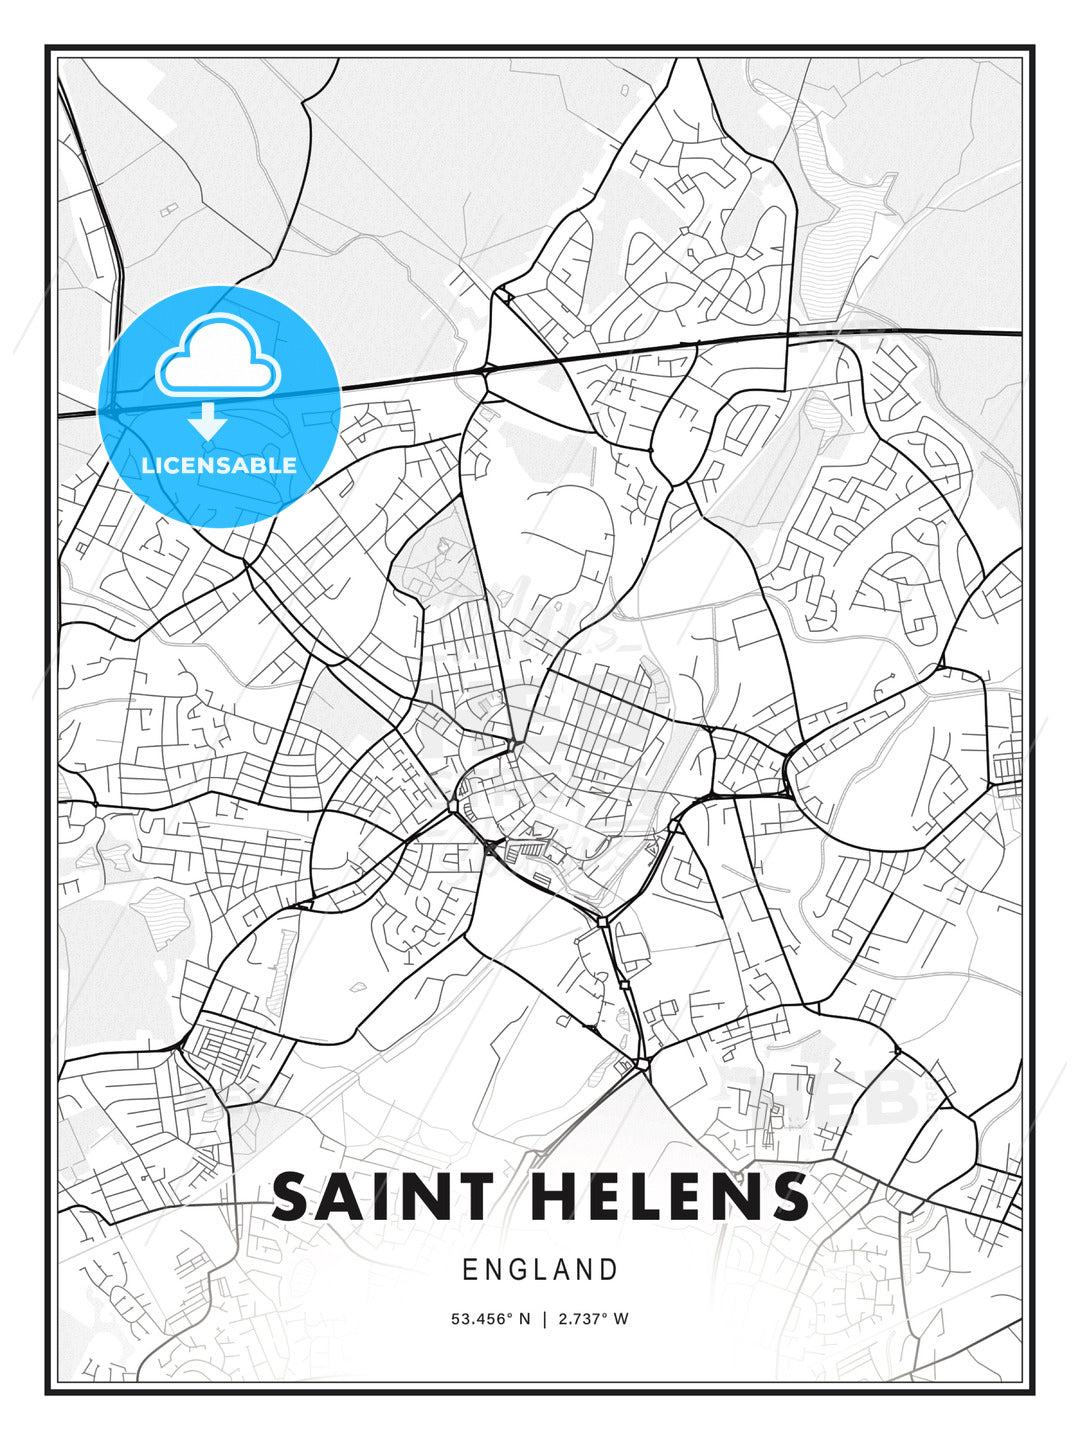 Saint Helens, England, Modern Print Template in Various Formats - HEBSTREITS Sketches